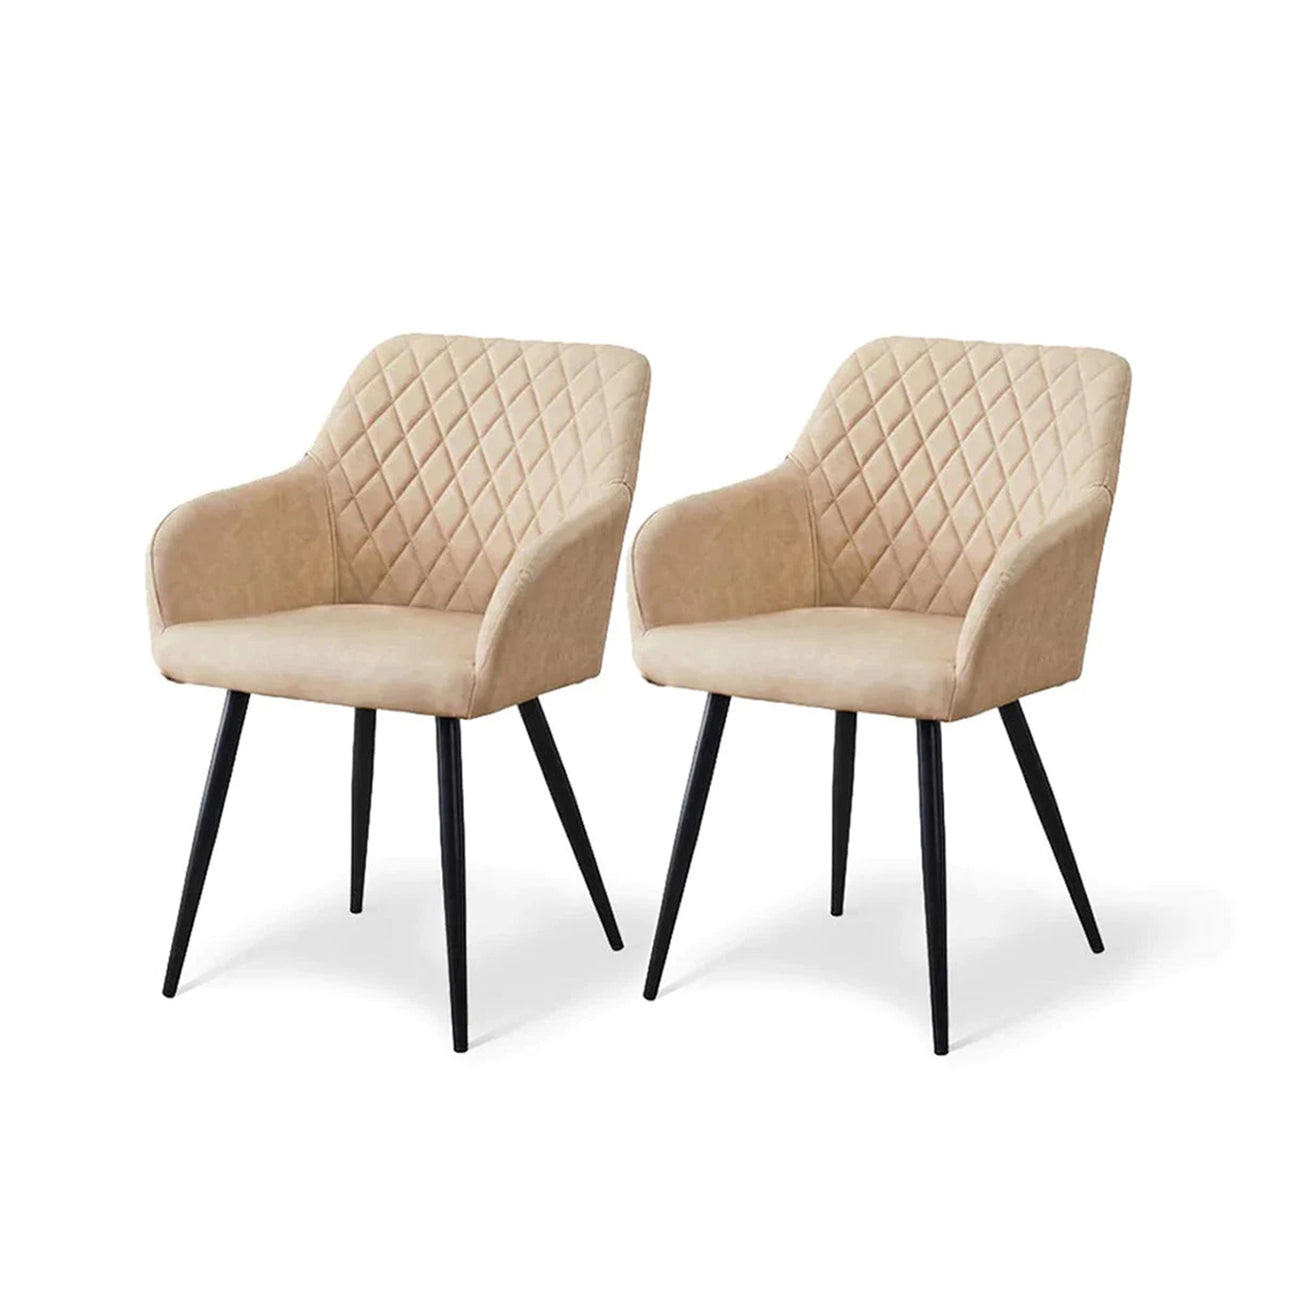 Frazer Diamond Dining Chairs [Set of 2] [Faux Leather]